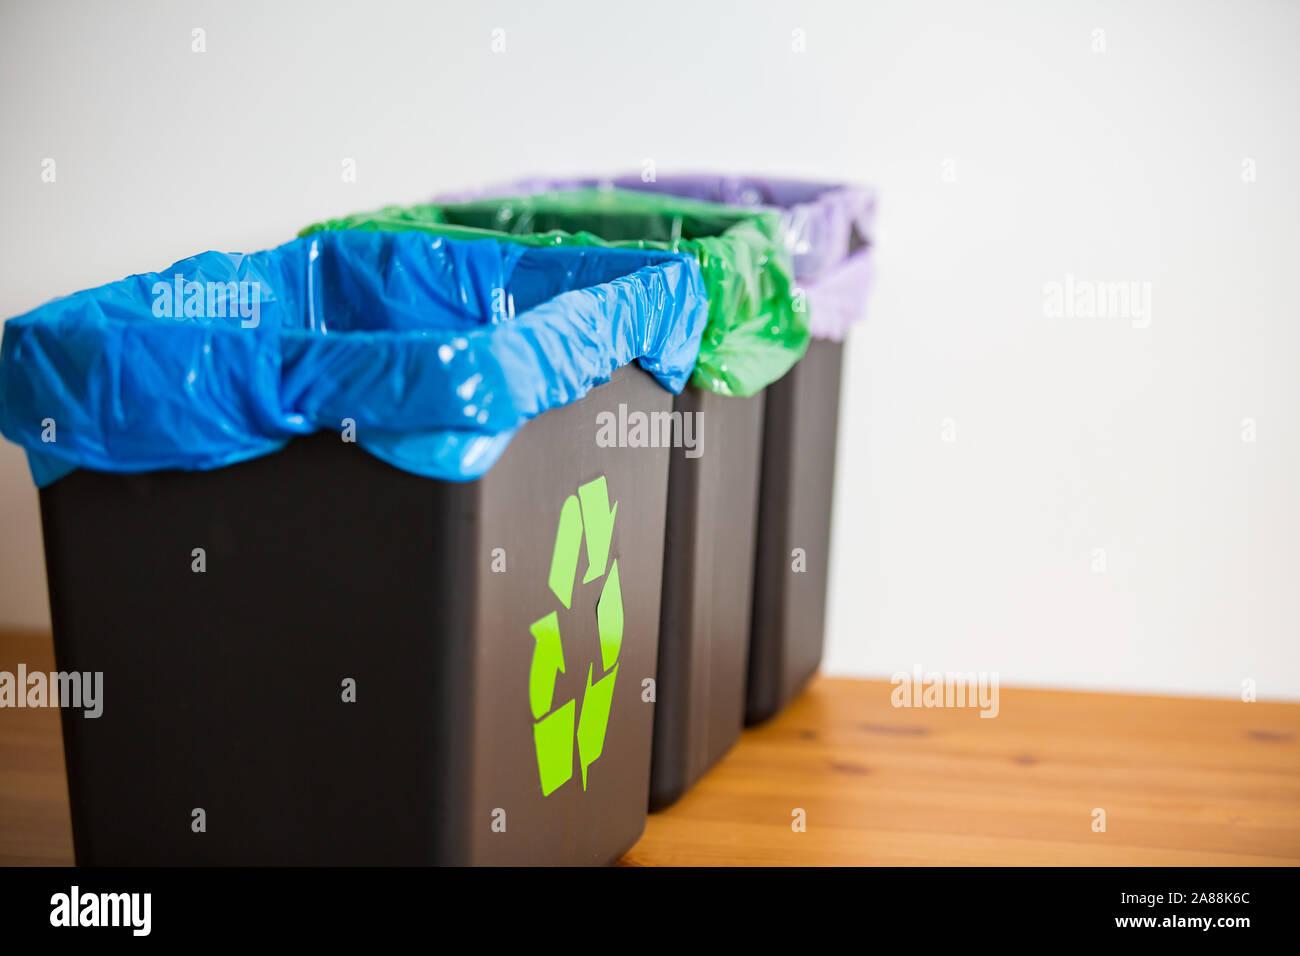 Hand putting old newspapers into recycling bin. Person in a house kitchen separating waste. Black trash bin with blue bag and recycling symbol. Stock Photo